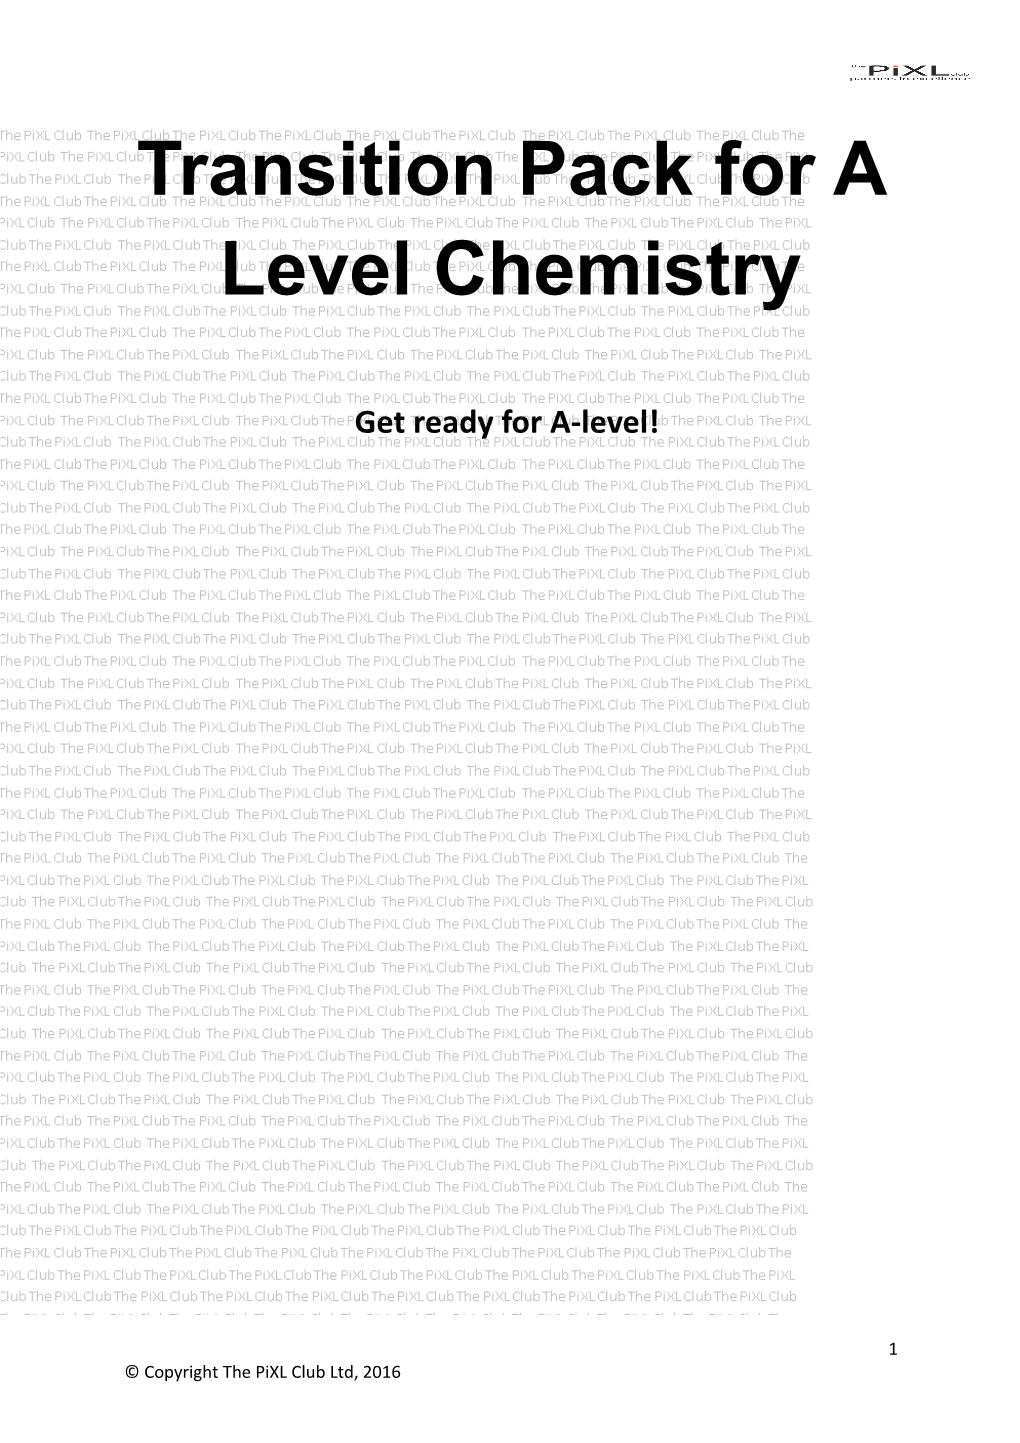 Get Ready for A-Level!